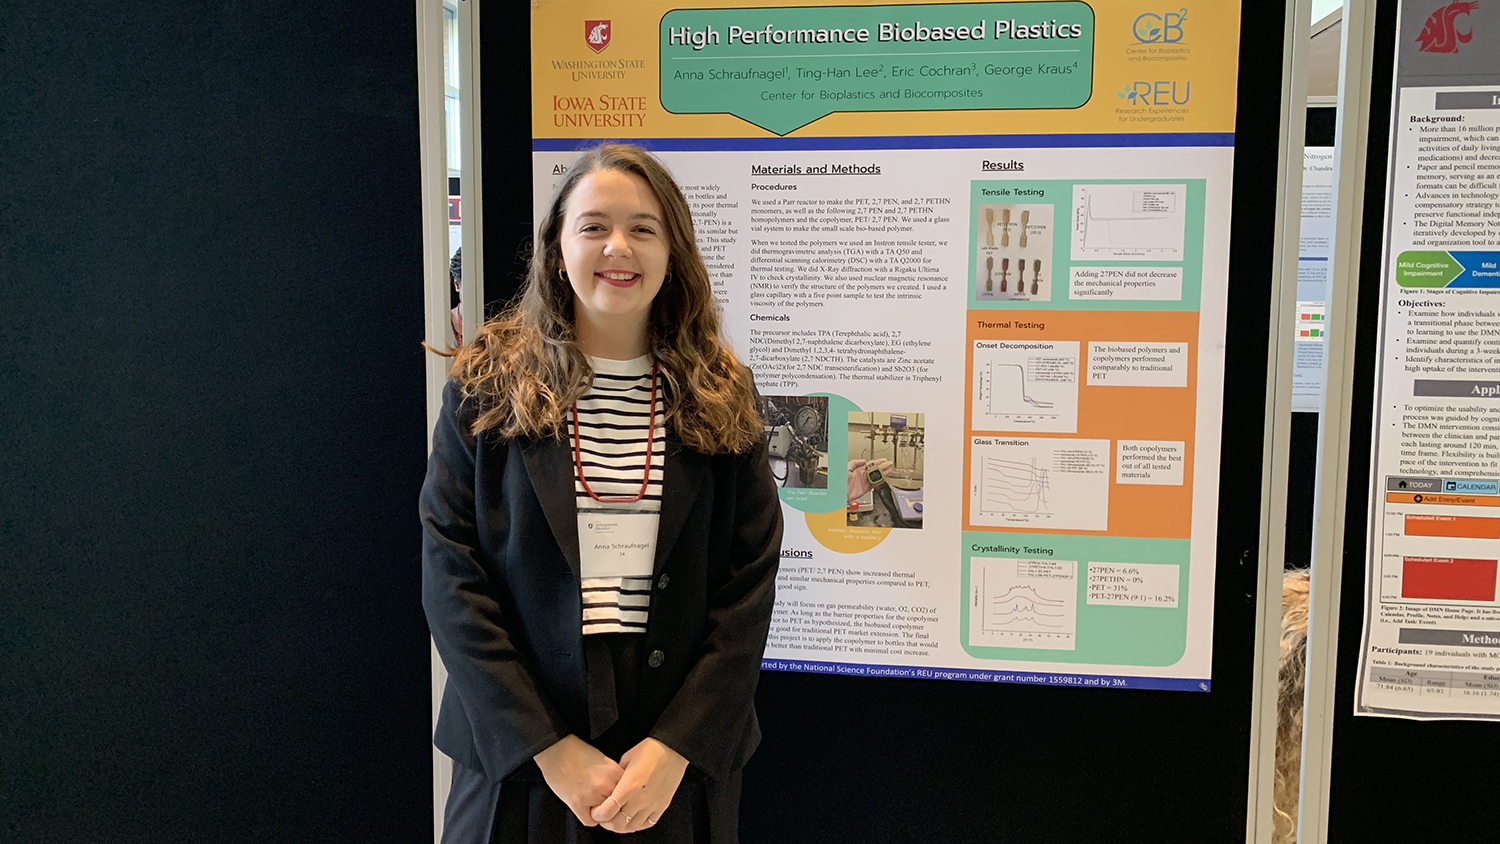 Anna Schraufnagel - Student Represents NC State at World Bioeconomy Conference